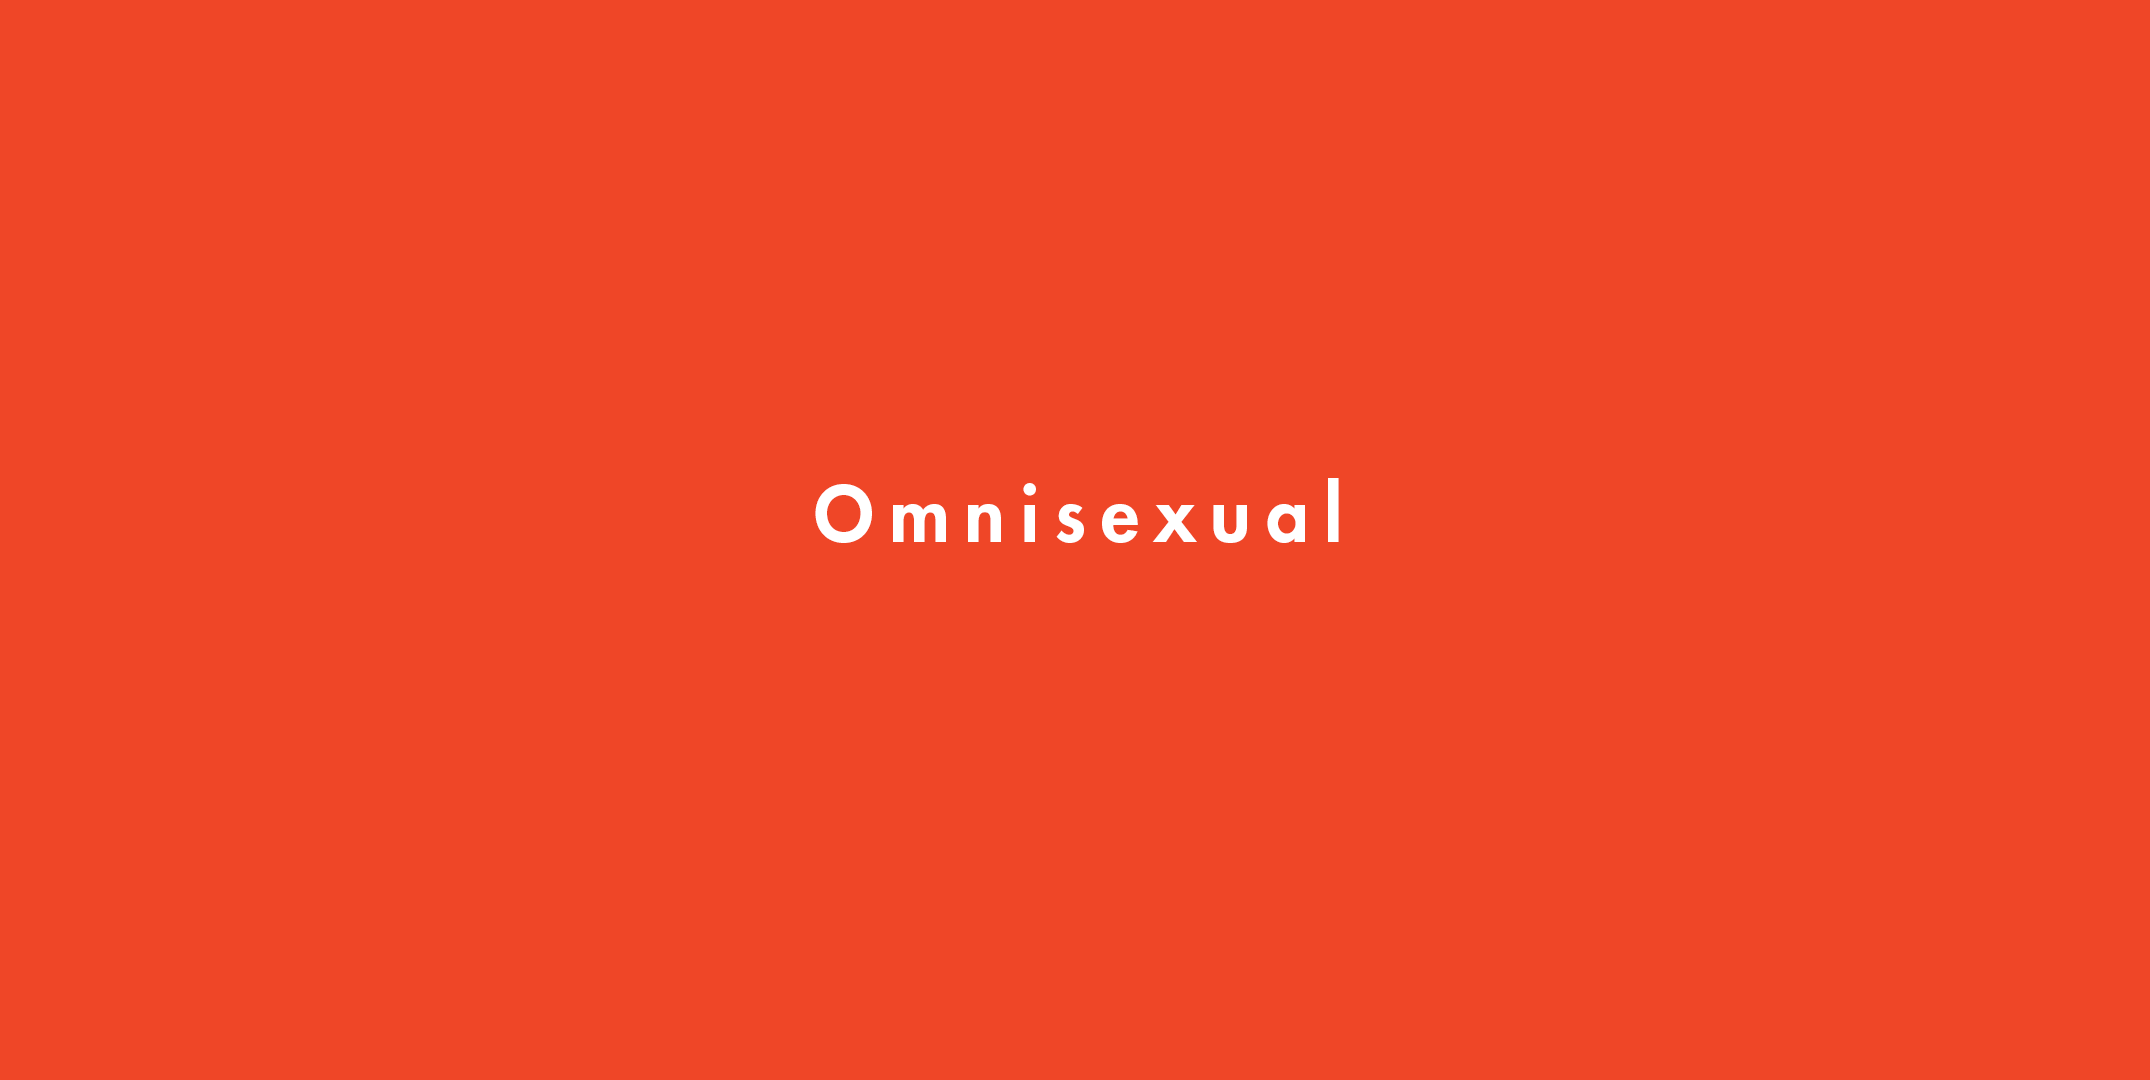 Omnisexual Meaning and Definition It Means to Be Omnisexual